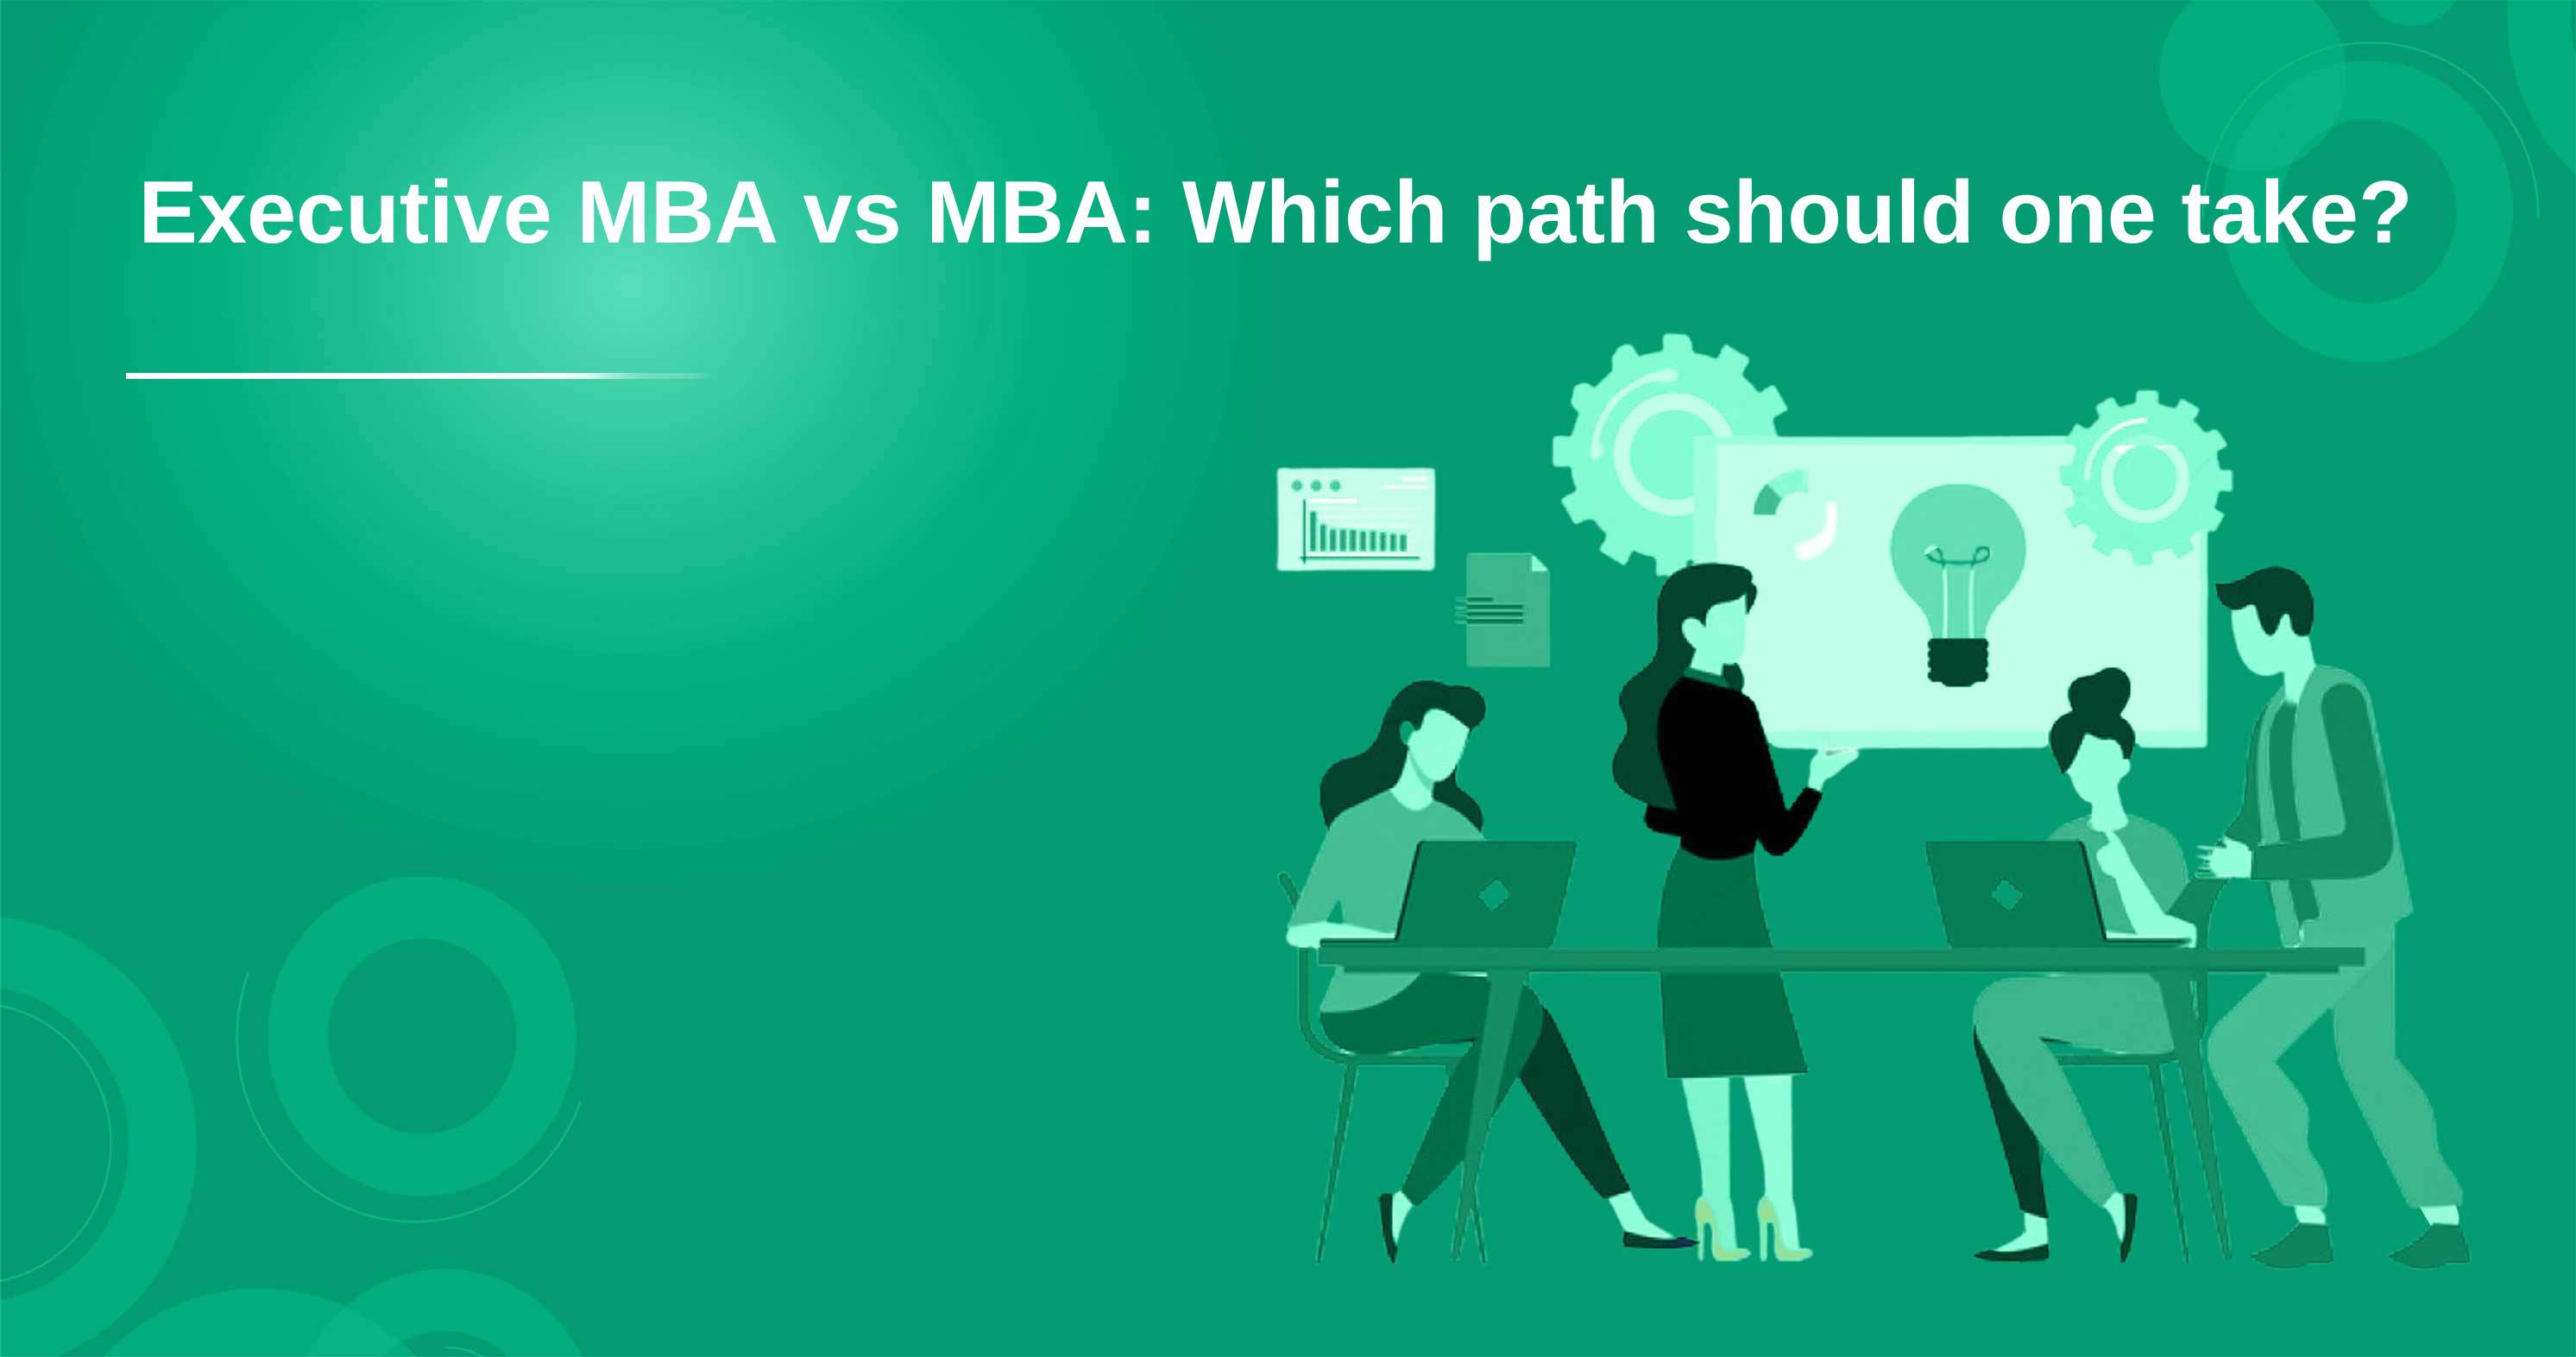 Executive MBA vs MBA: Which path should one take?